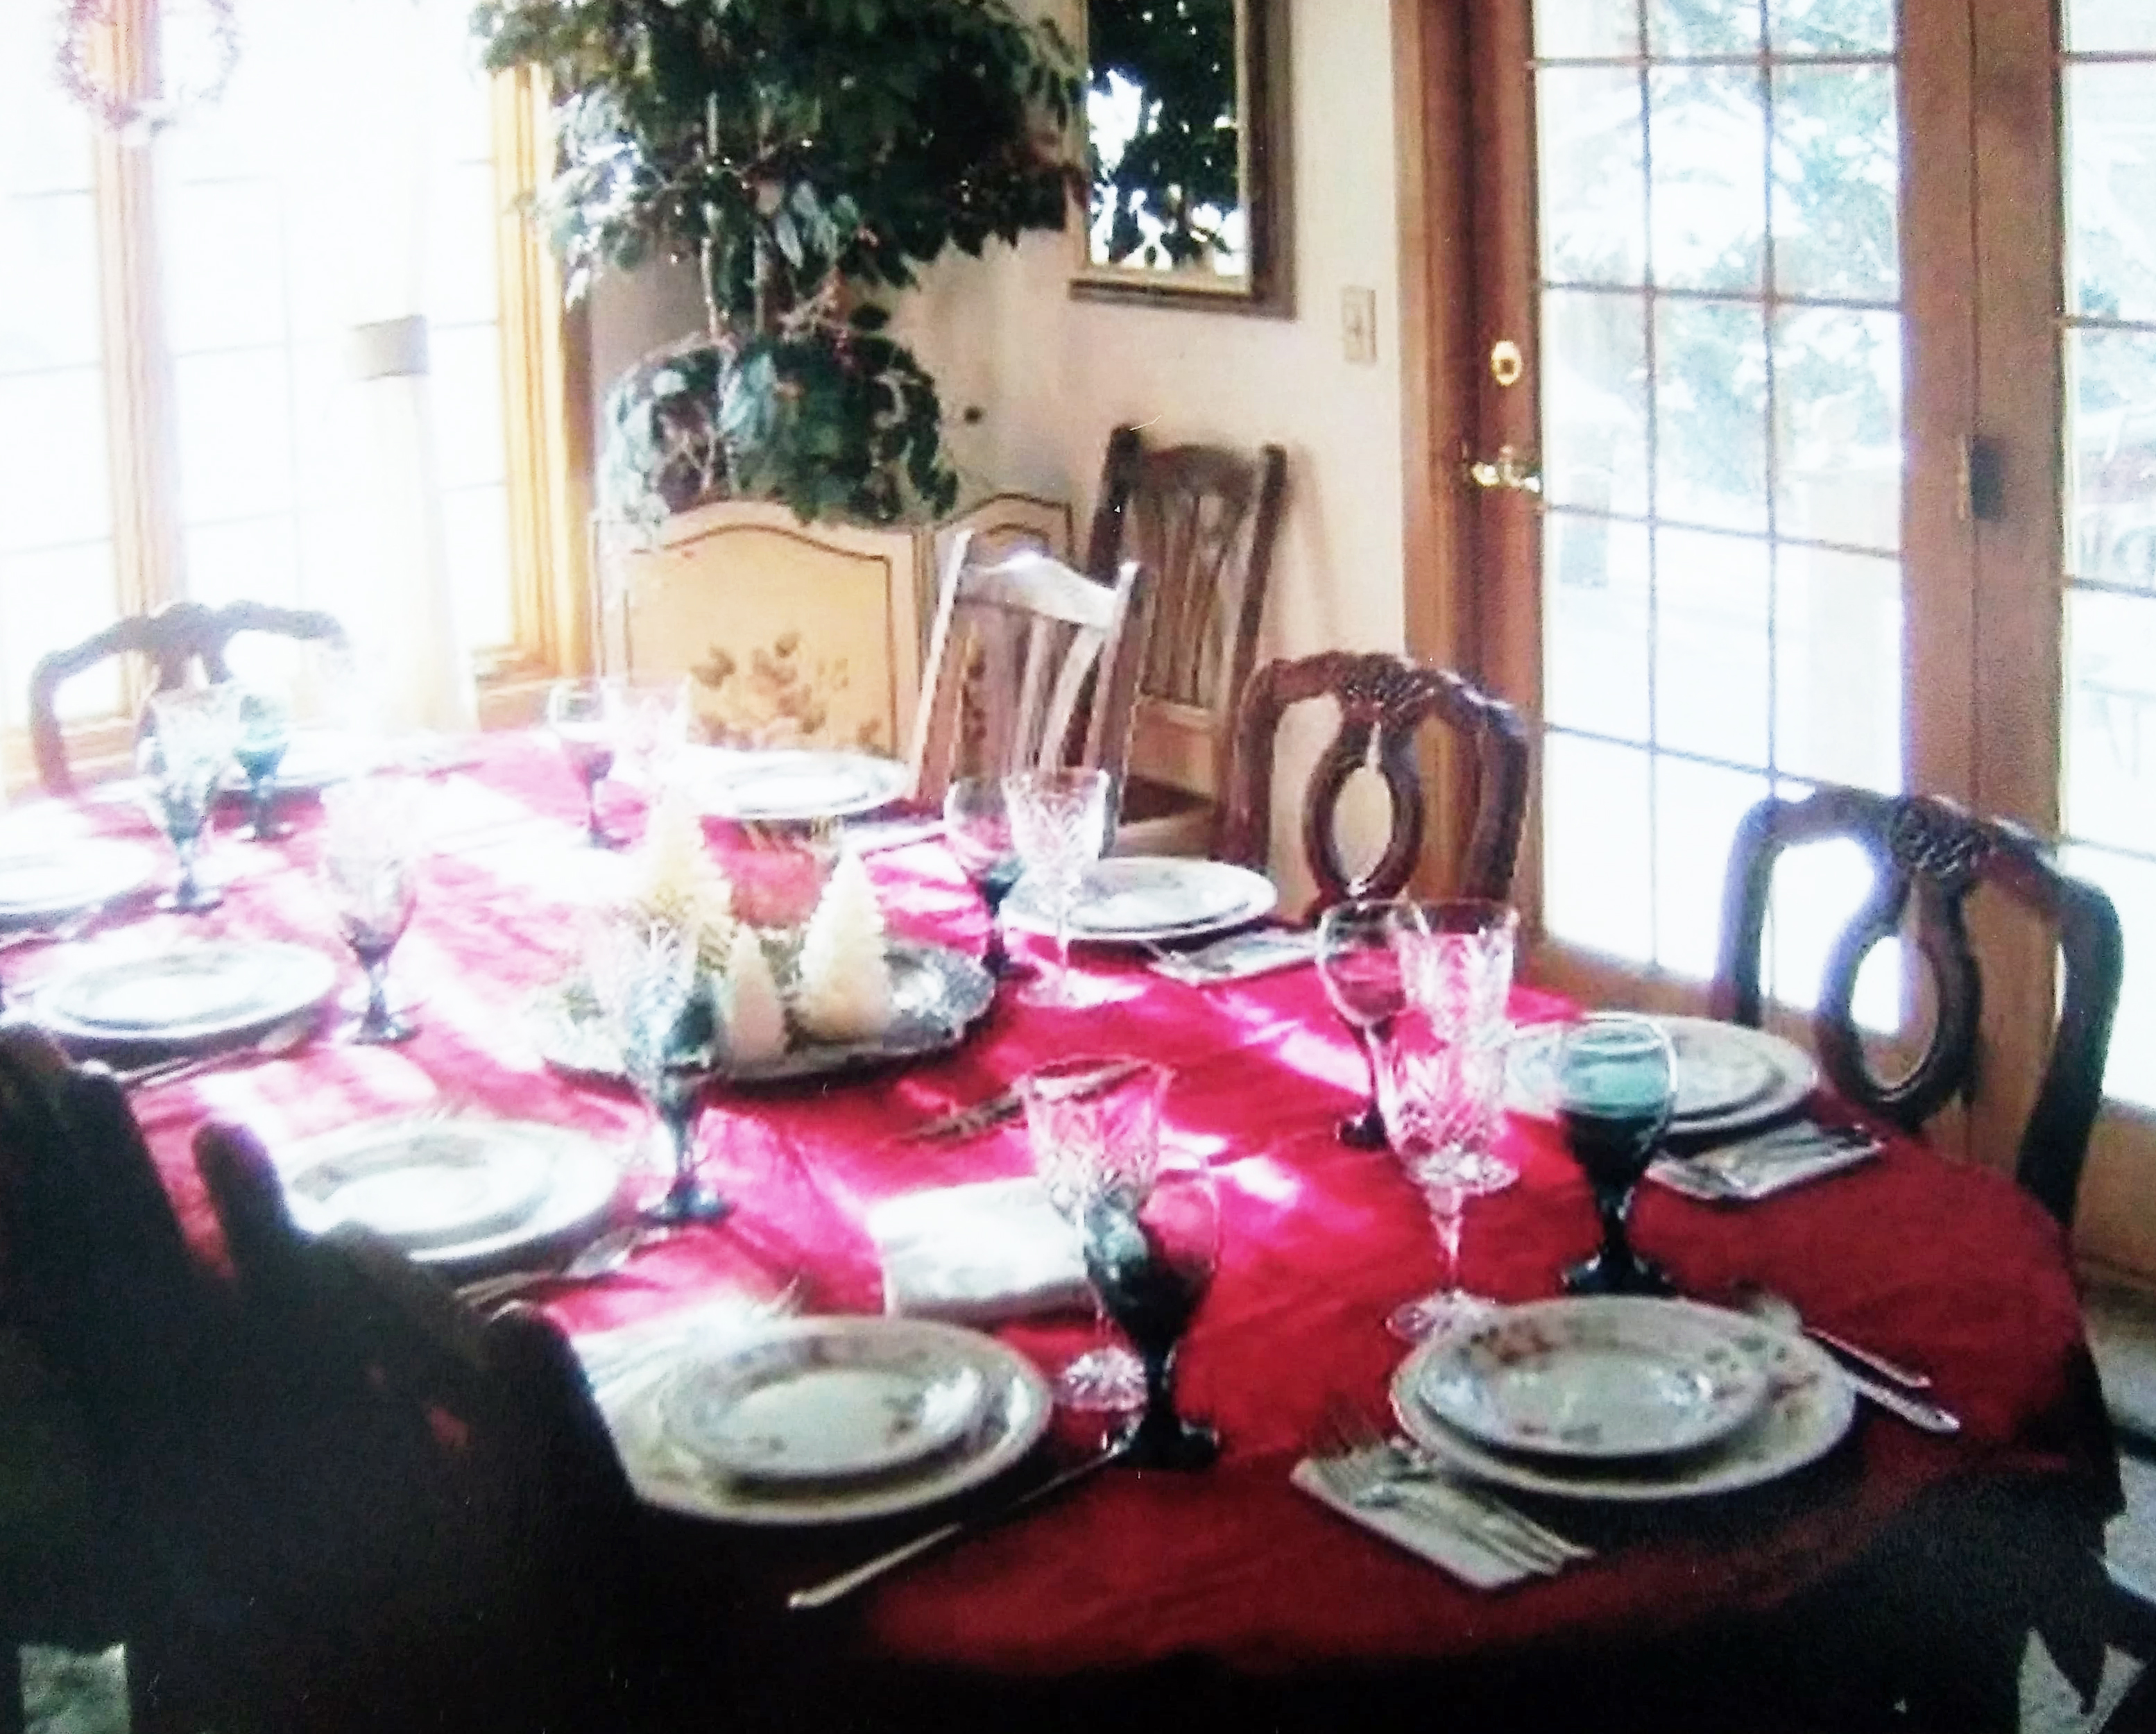 A photo to remember the way mom set up her dining room.